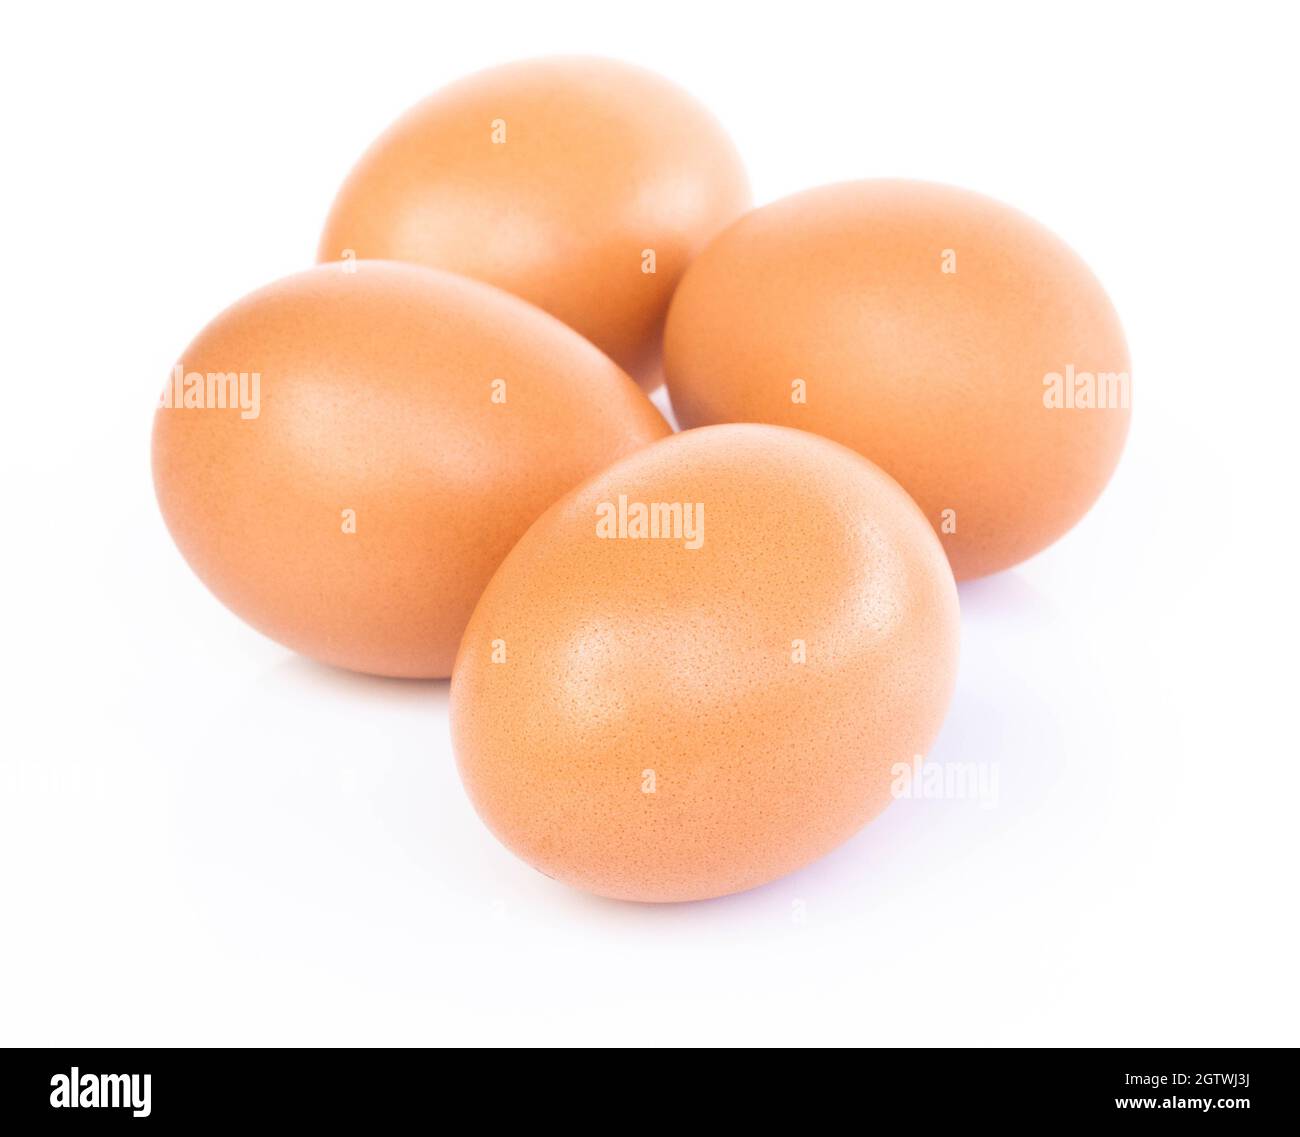 Close-up Of Eggs Against White Background Stock Photo